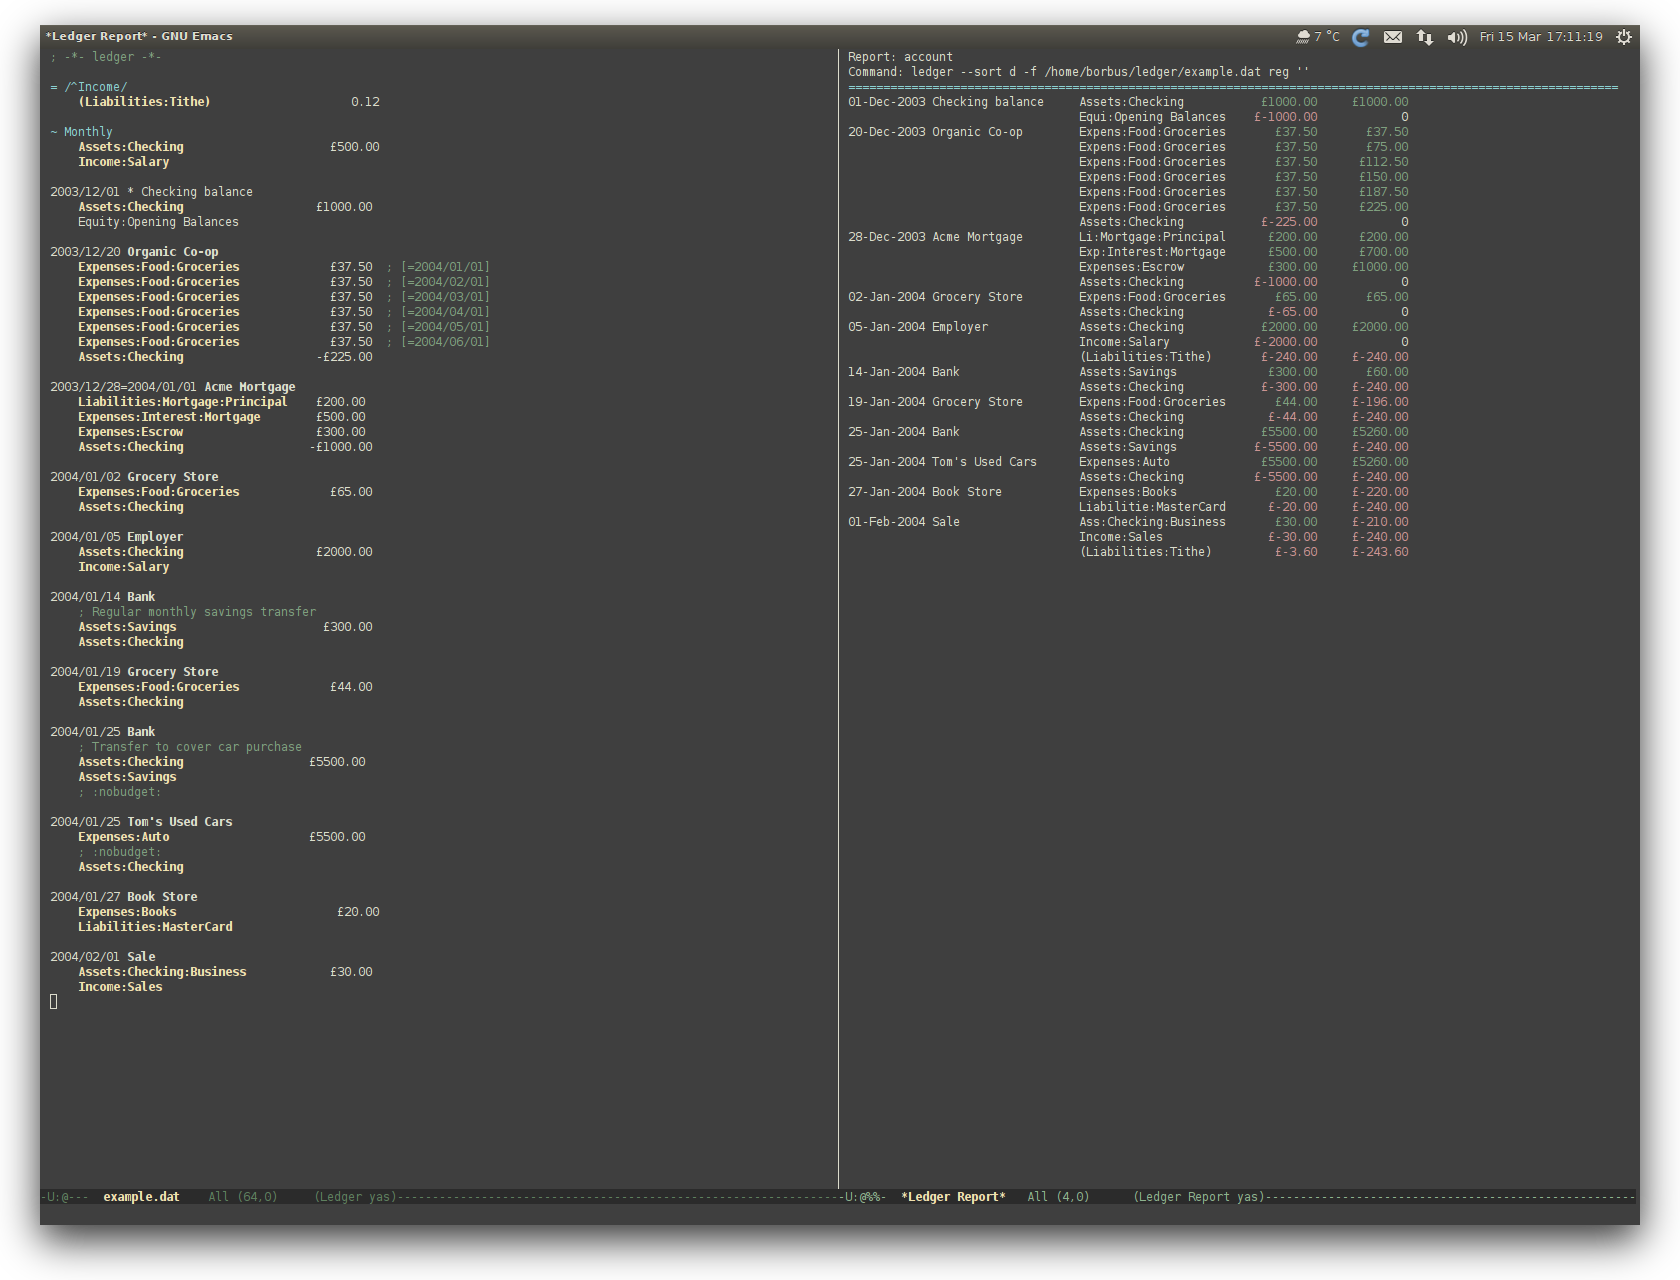 /TakeV/spacemacs/media/commit/ad0f26abde49cdd2d78d57610780d50575815712/layers/finance/img/ledger.png